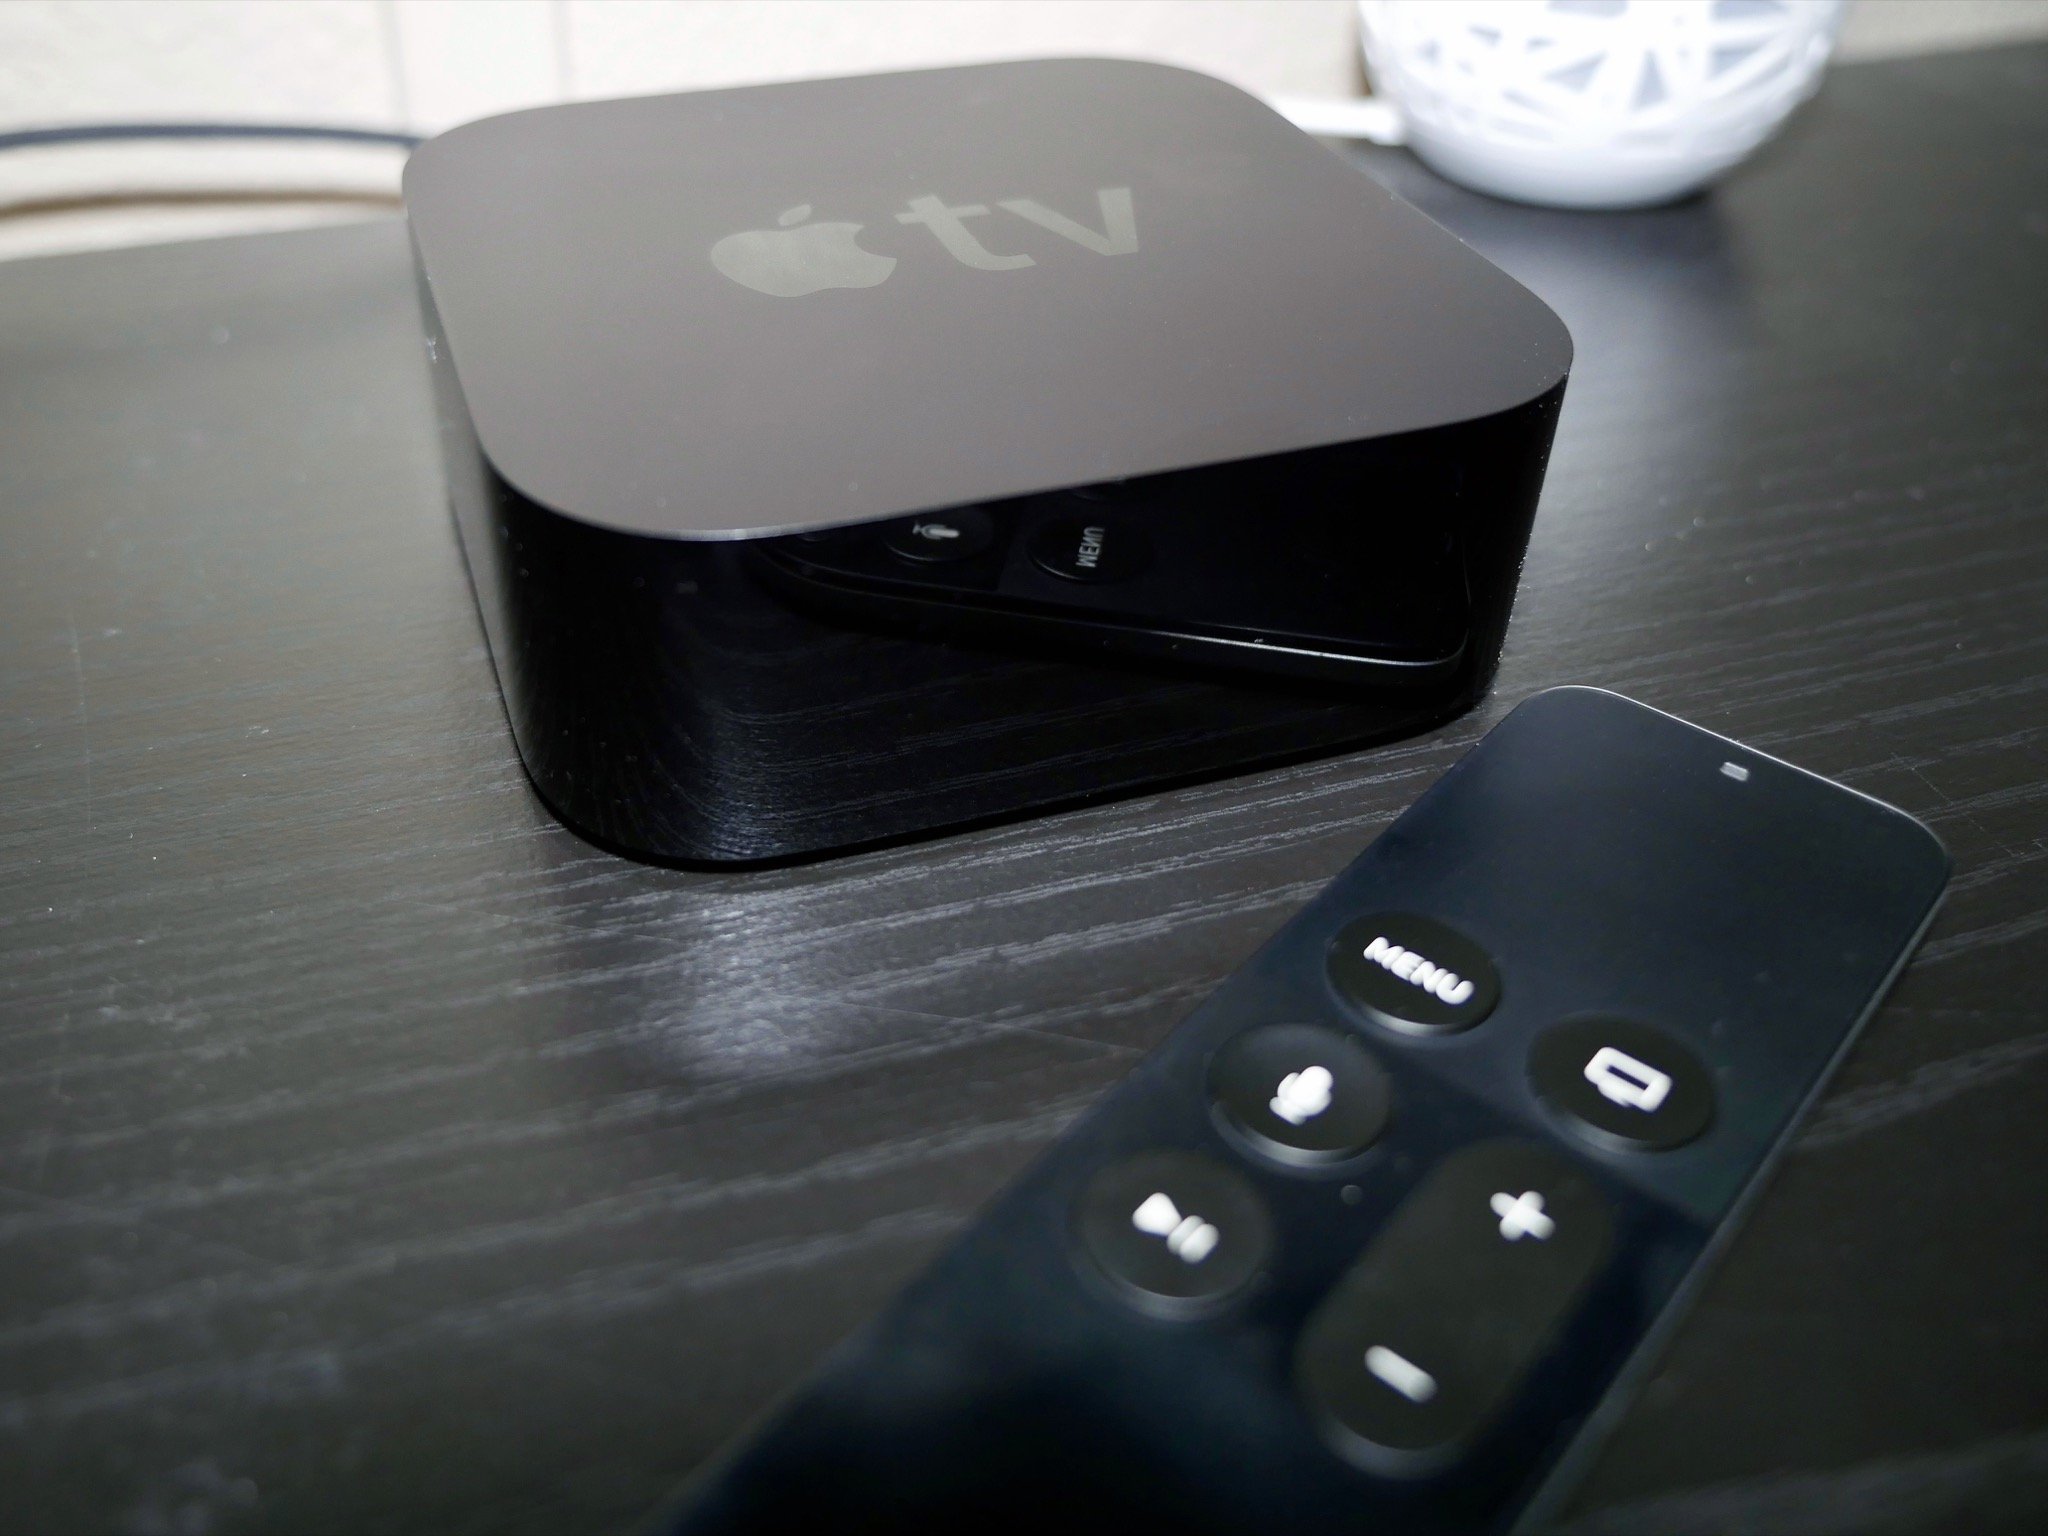 Jobtilbud Bakterie raket How to connect your AirPods to Apple TV using Siri | iMore